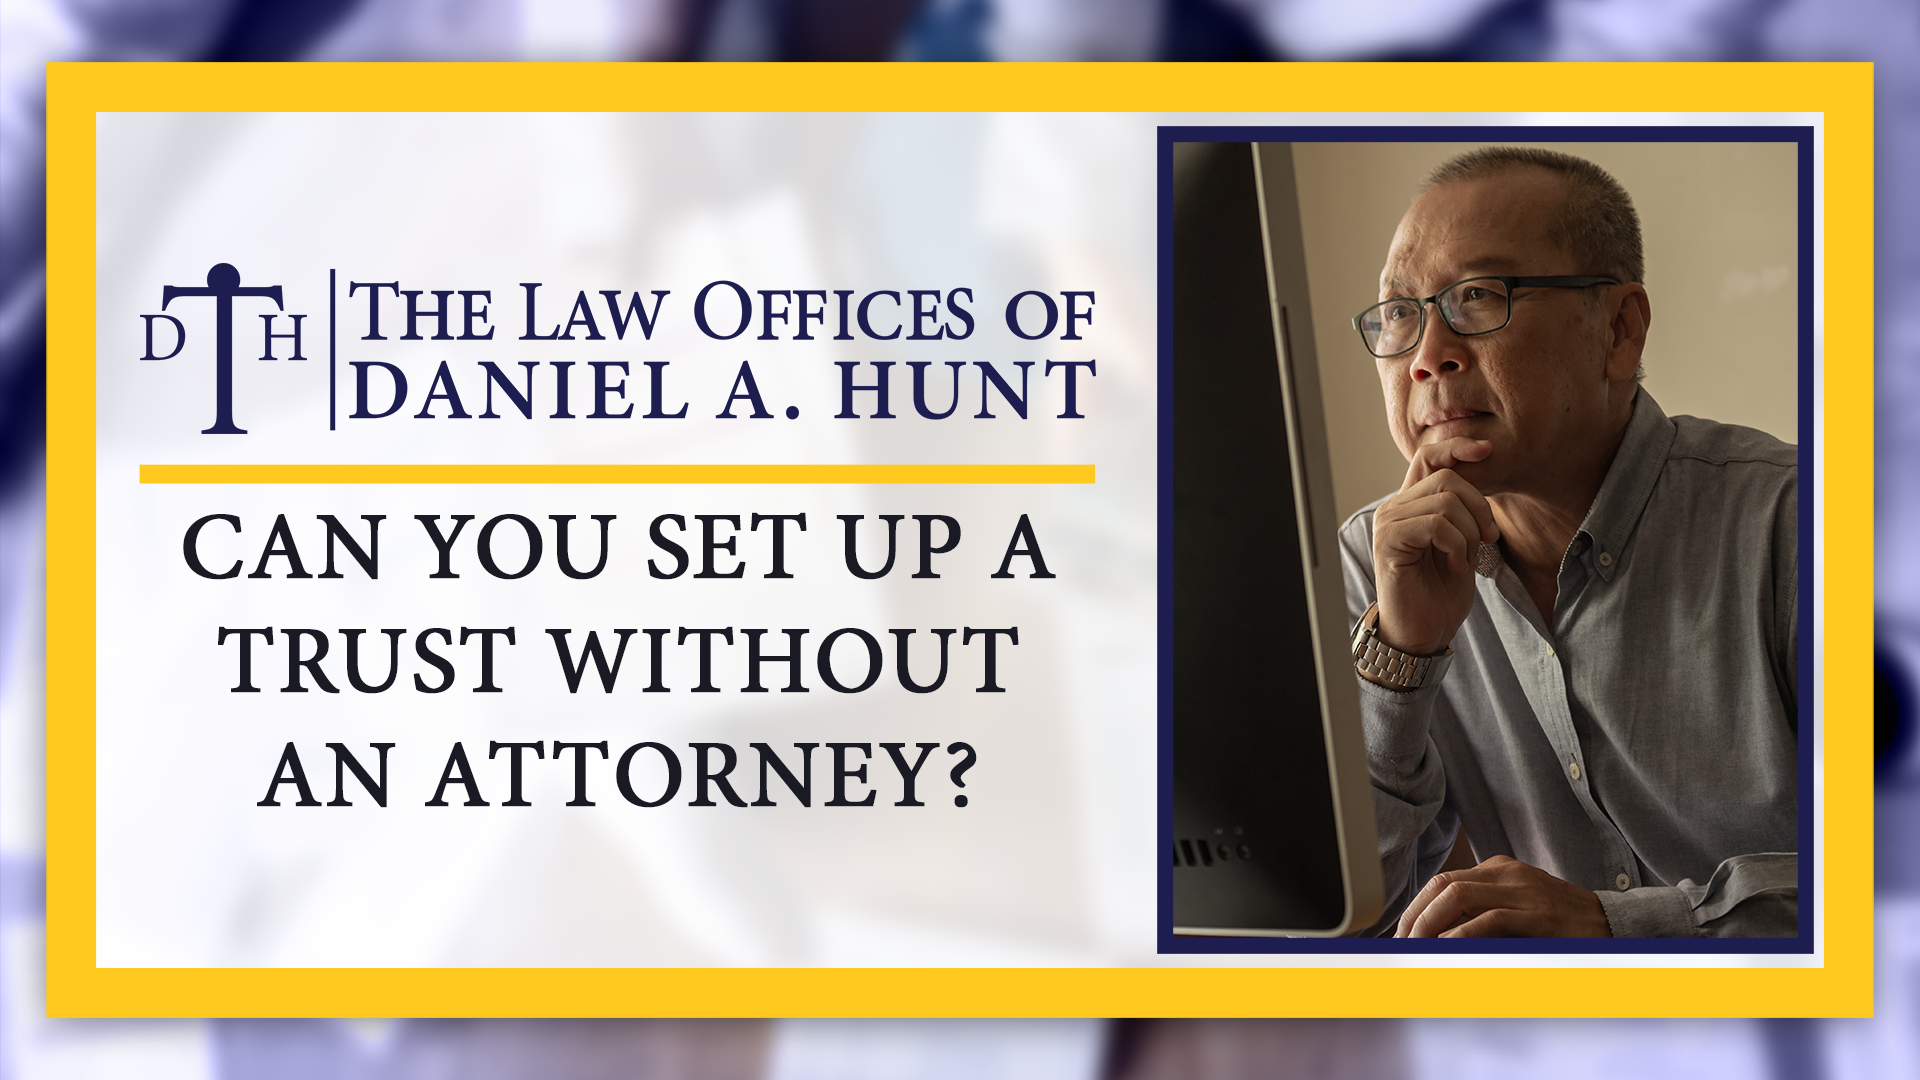 Can you set up a trust without an attorney